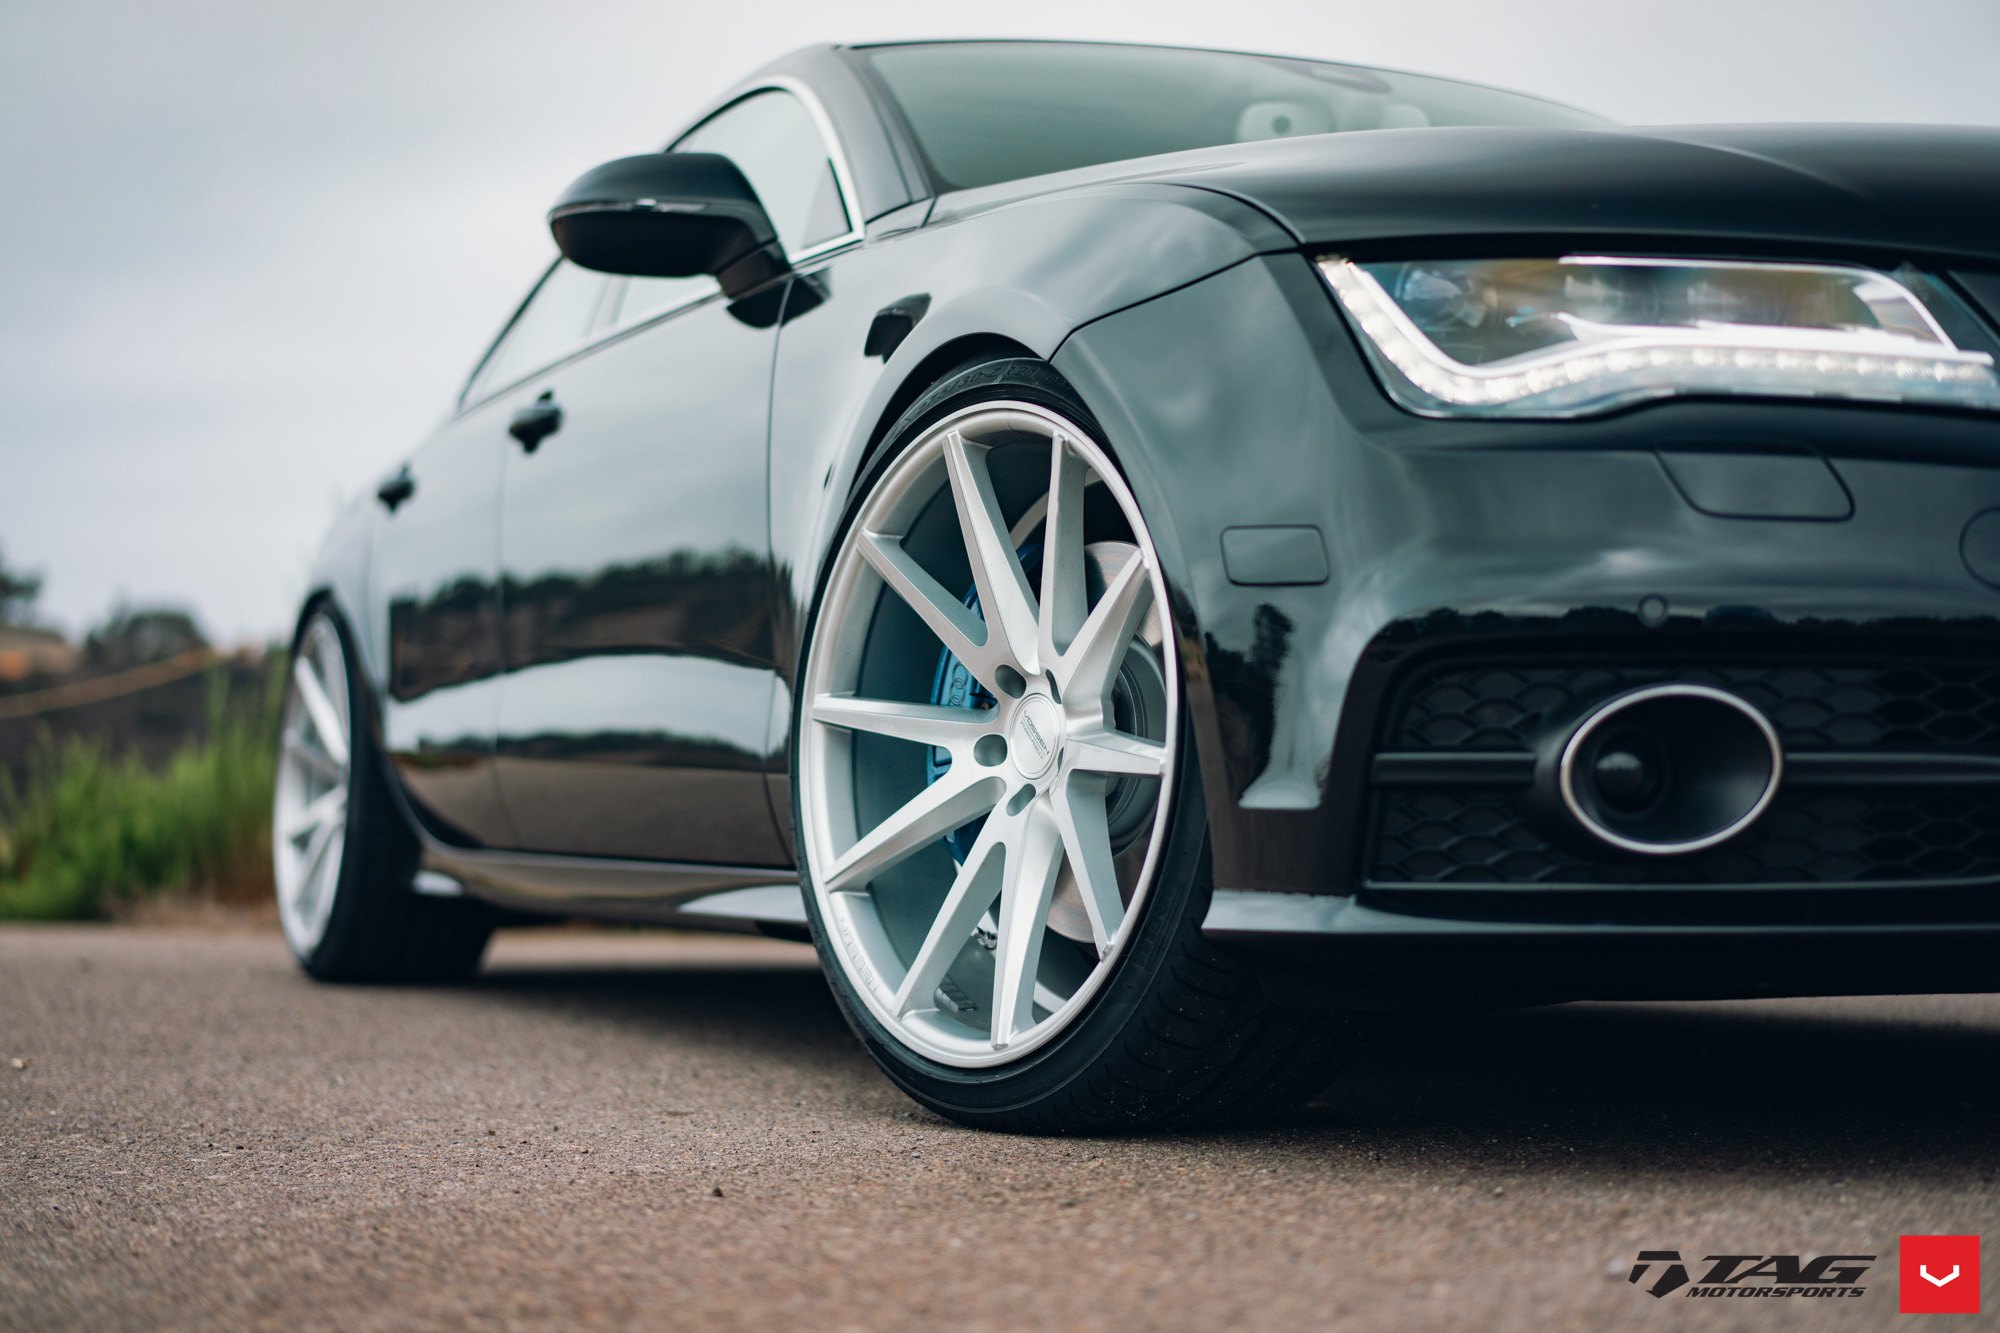 Black Audi A7 with Aftermarket Front Bumper - Photo by Vossen